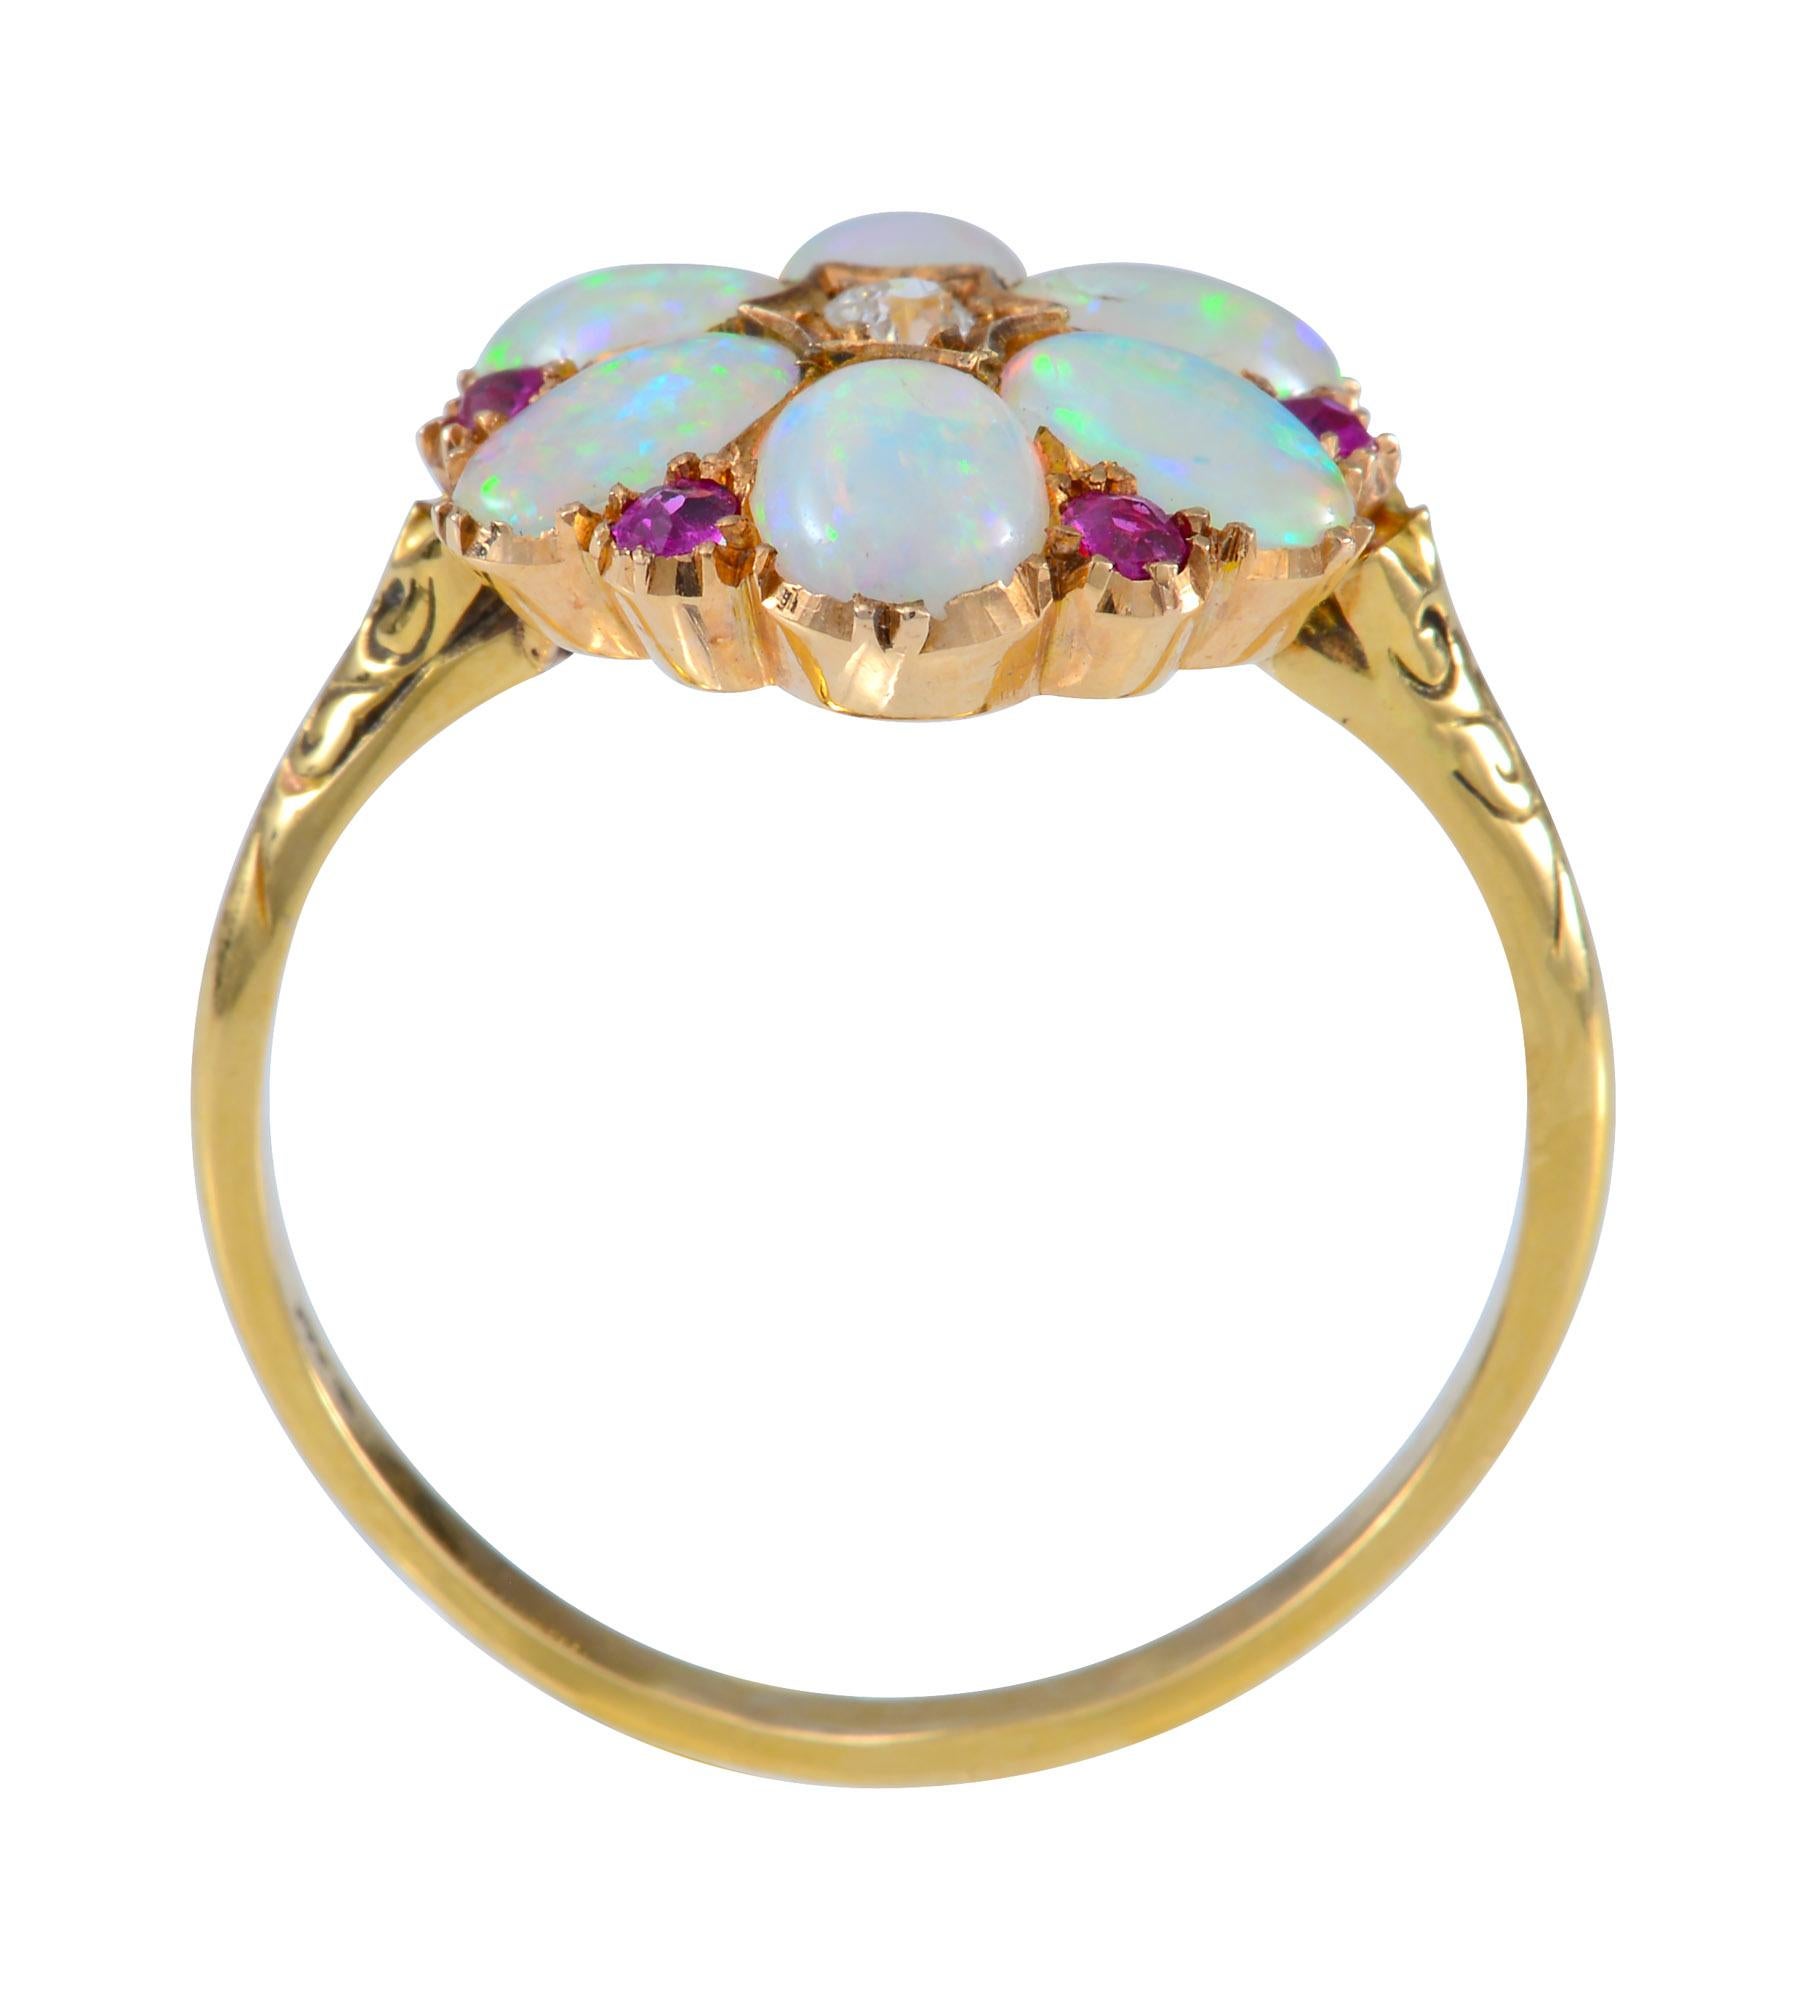 This Antique Opal , Ruby and Diamond Ring in 18ct yellow gold features 6 oval crystal opals of approximately 6mm by 4mm indispersed with 6 old cut rubies of approximately 1.5mm in diameter with a total weight of 0.12 cts. The centre of the ring is